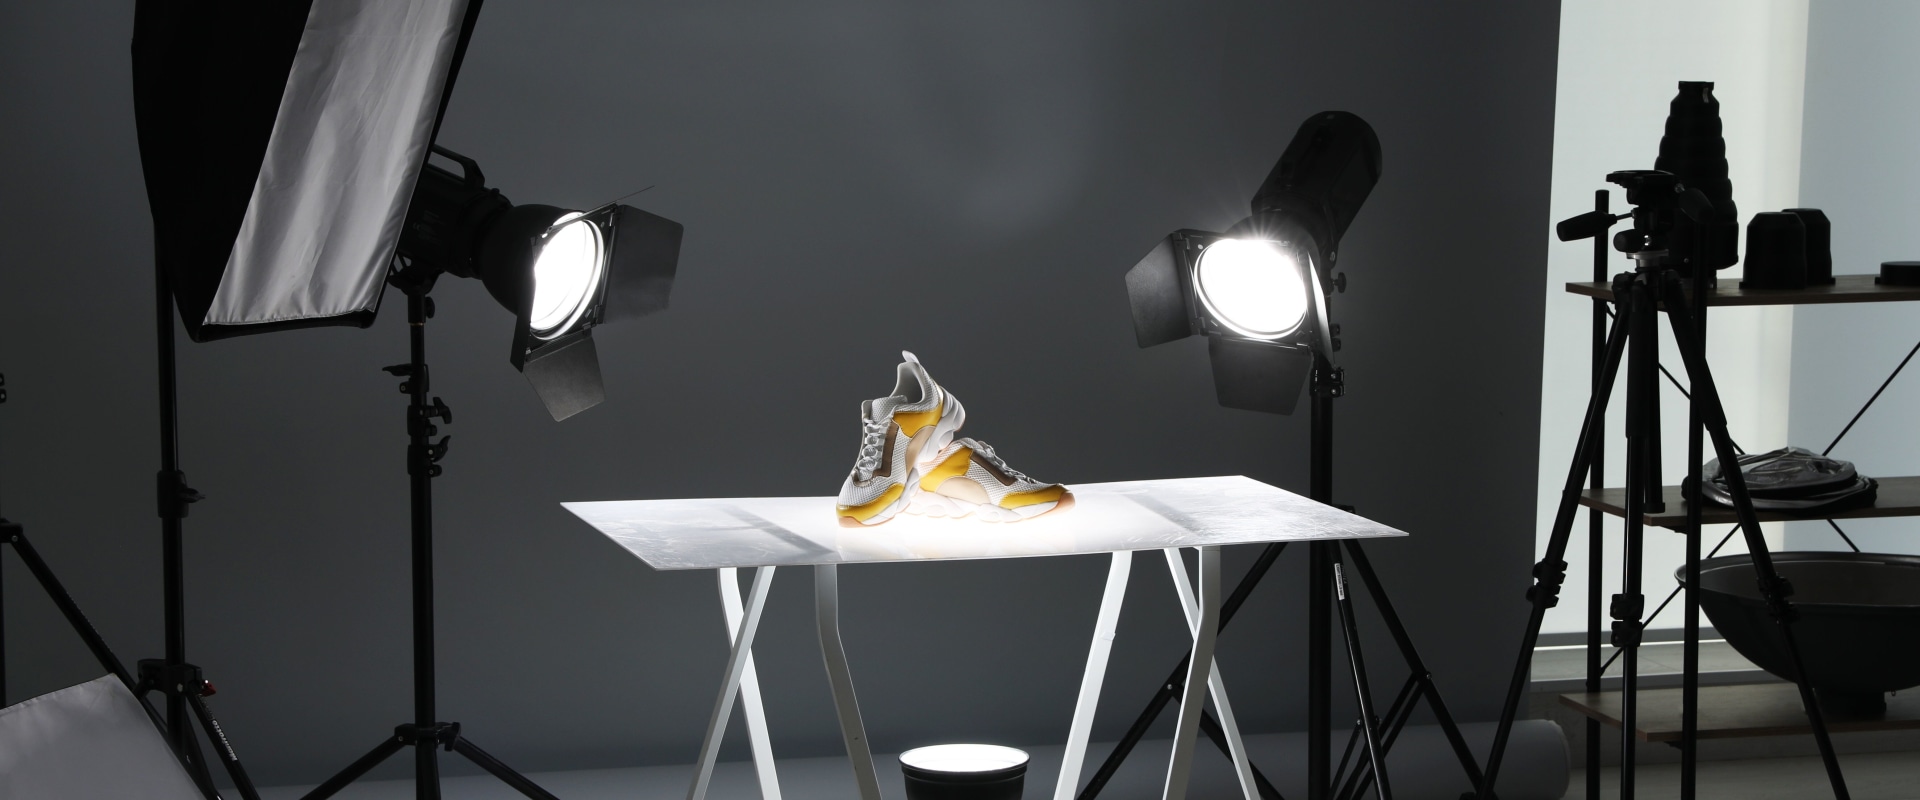 The Best Lighting Techniques for Product Photography